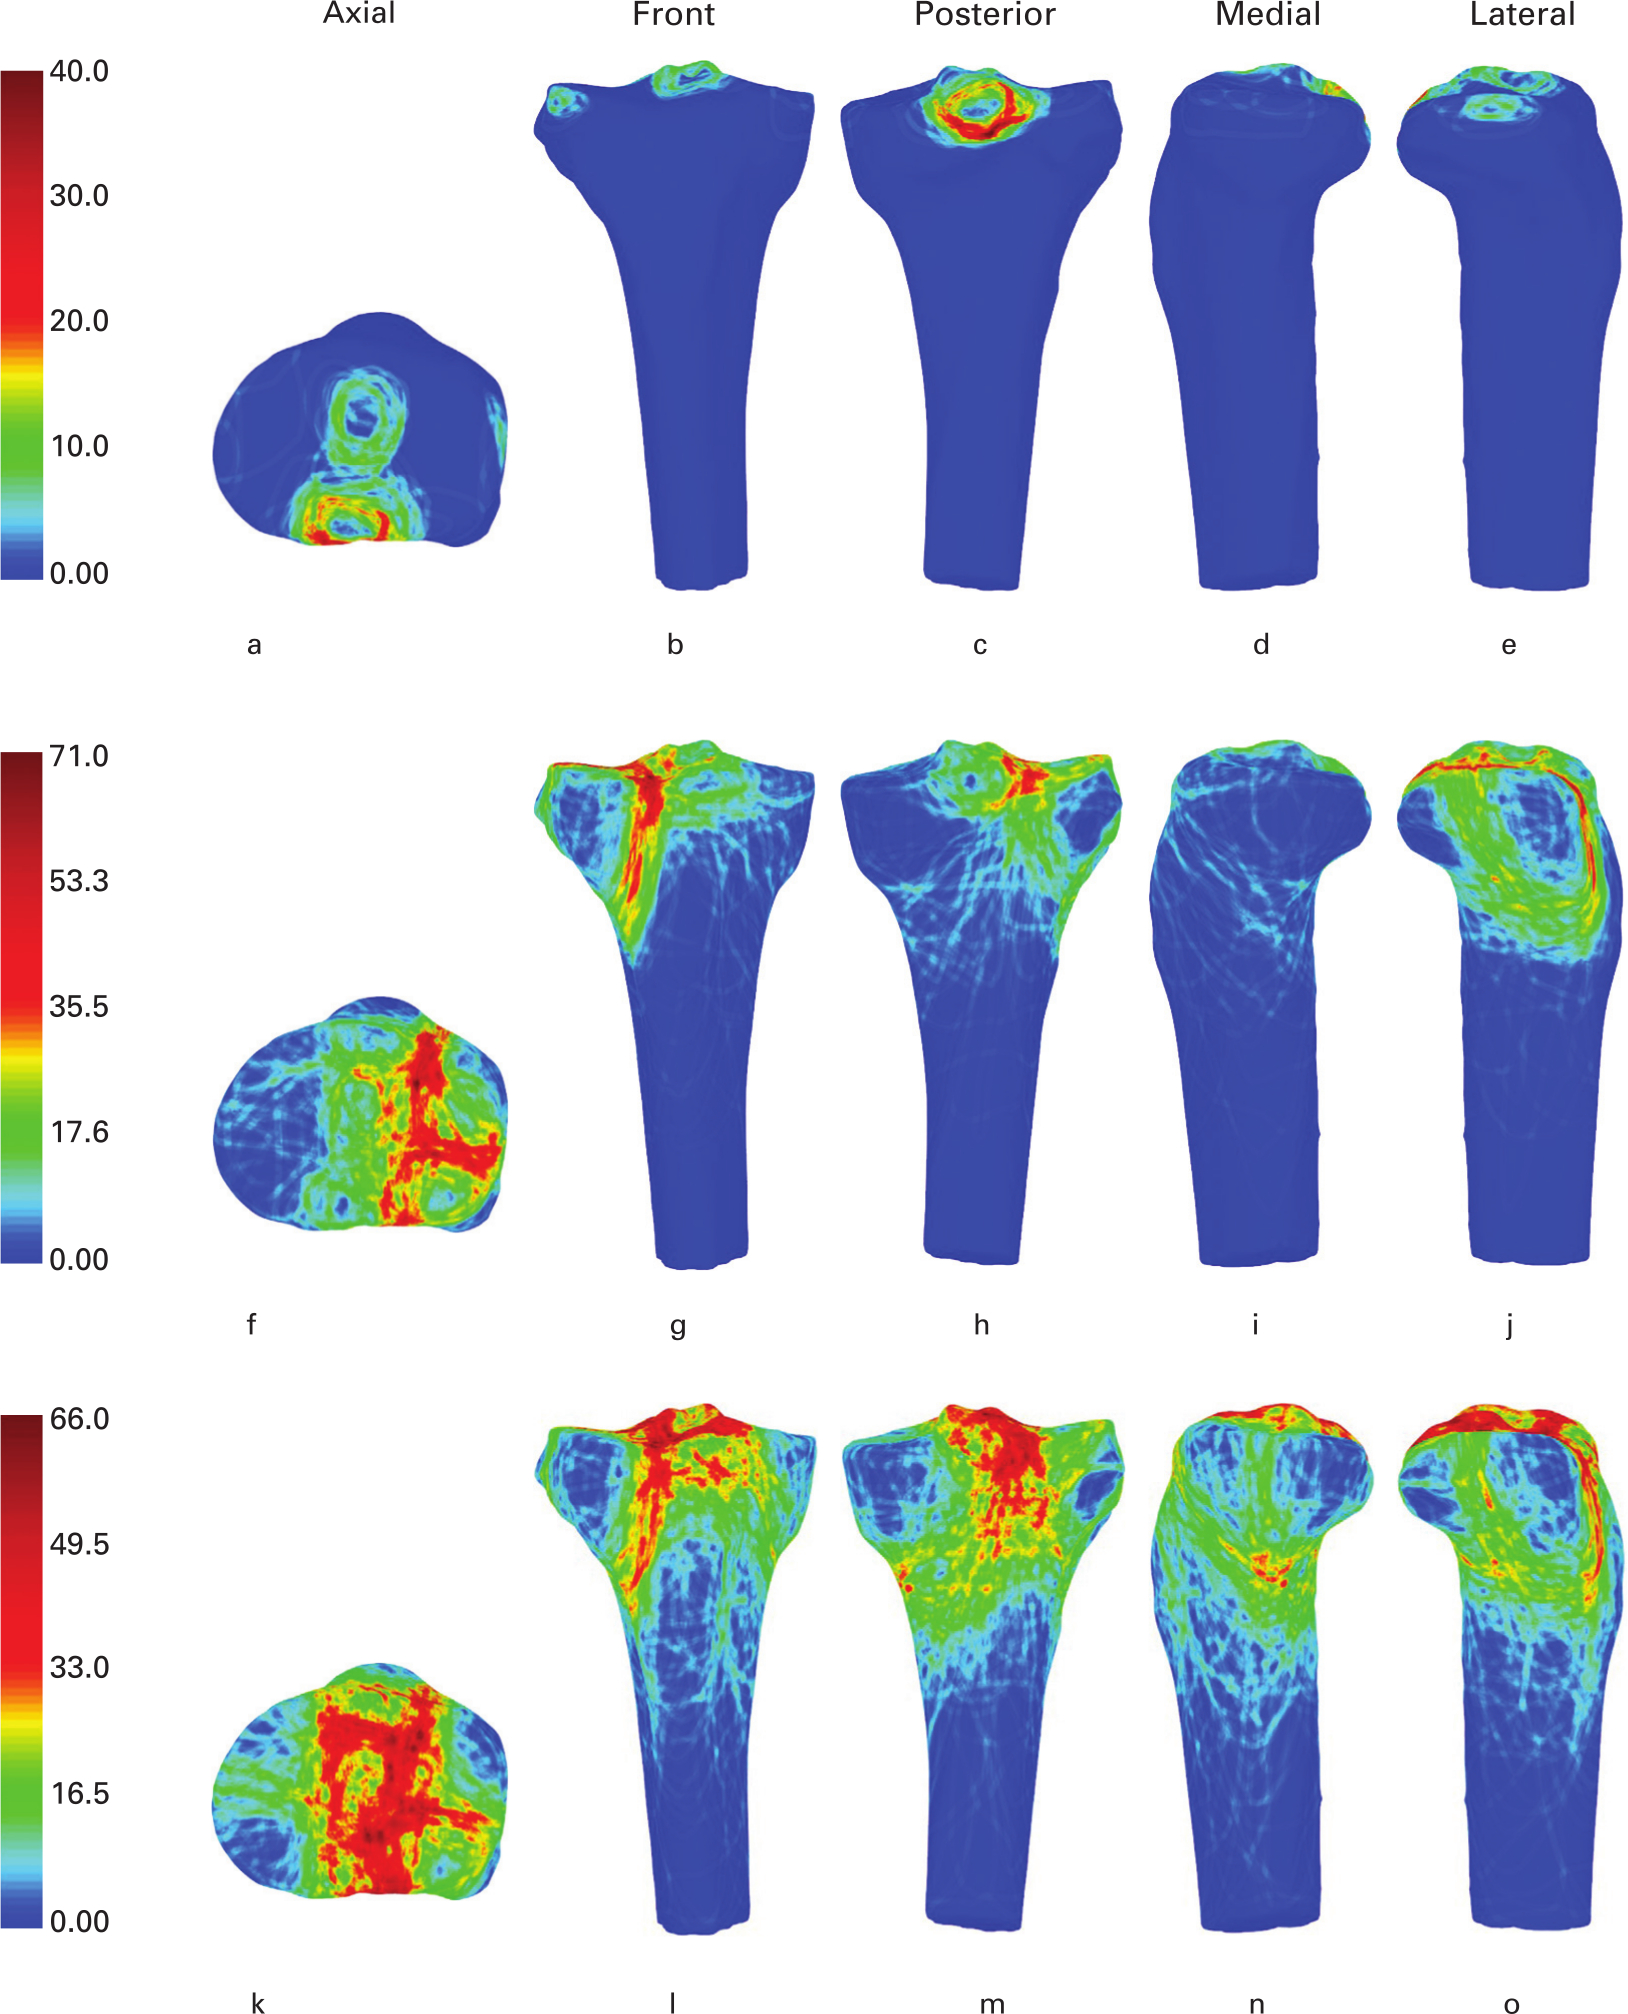 Fig. 5 
            Representative views of the 3D heat mapping of fracture lines according to the Orthopaedic Trauma Association/AO Foundation (OTA/AO): a) to e) type A; f) to j) type B; and k) to o) type C. These include the axial, front, posterior, medial, and lateral views. Red colour represents higher frequency of fracture line density.
          